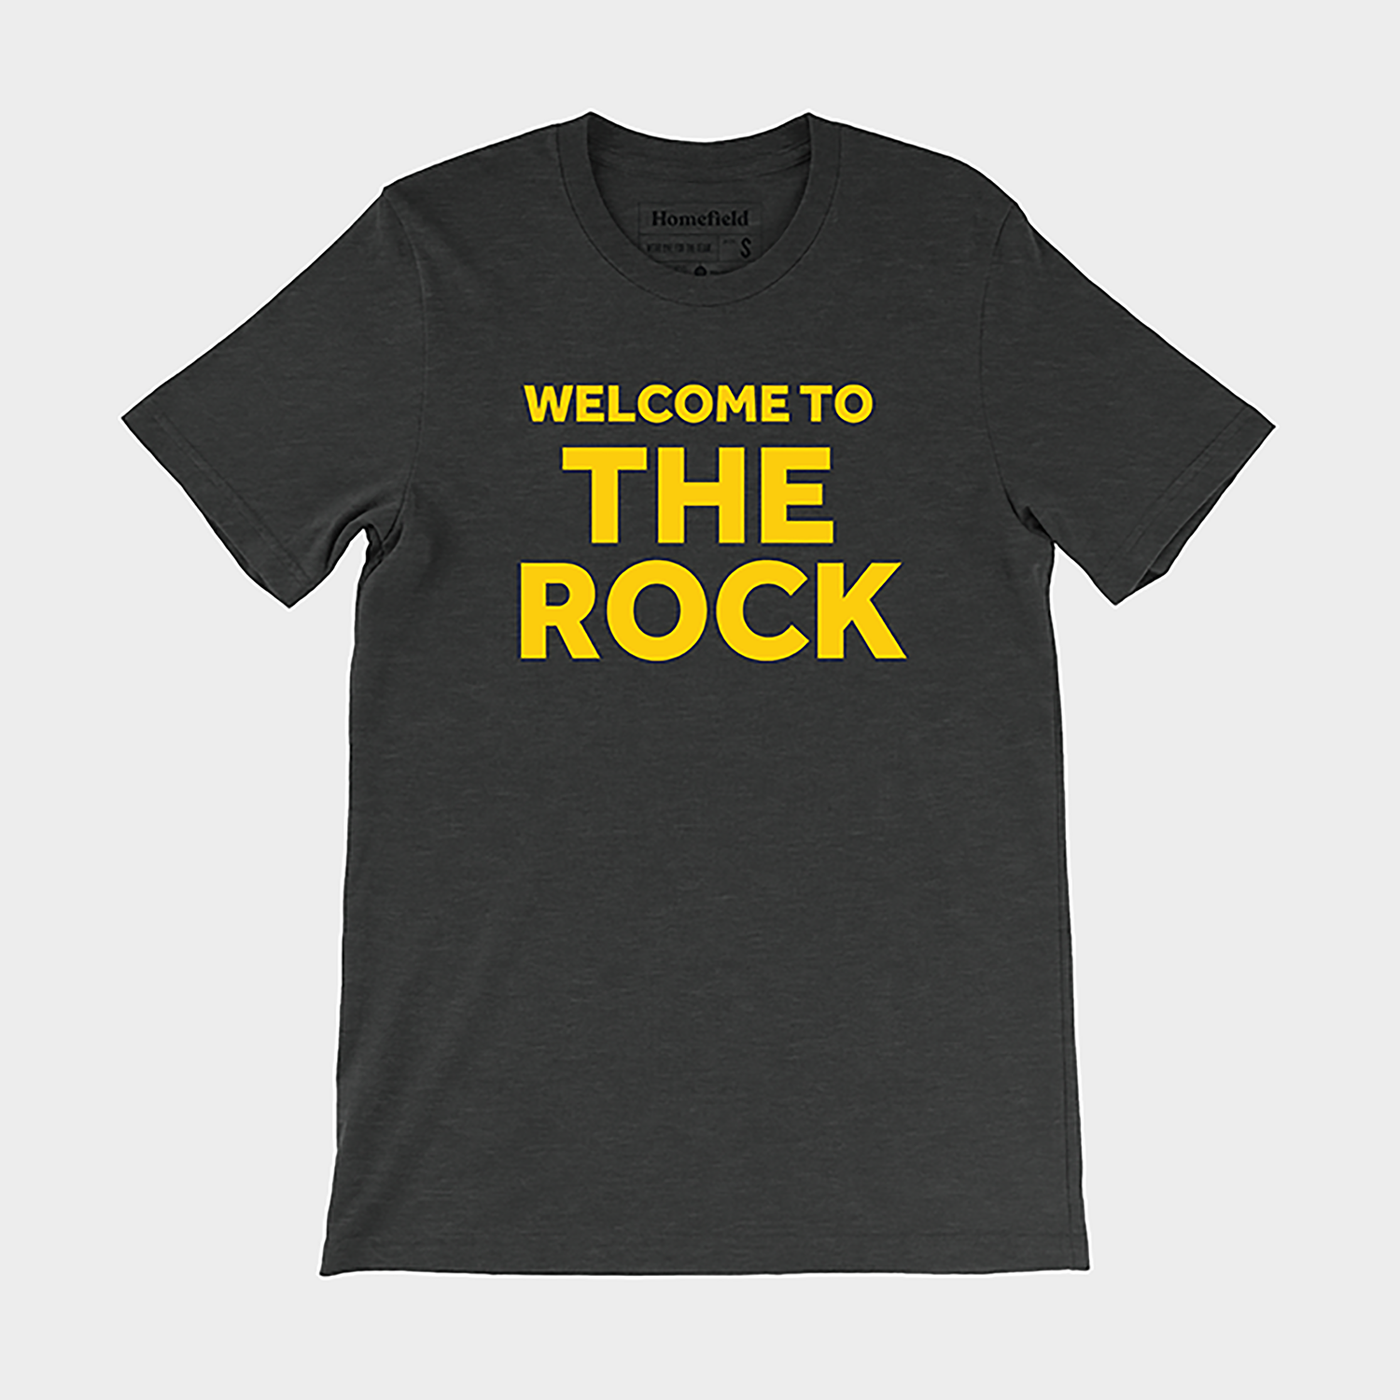 Welcome to Solid Rock!